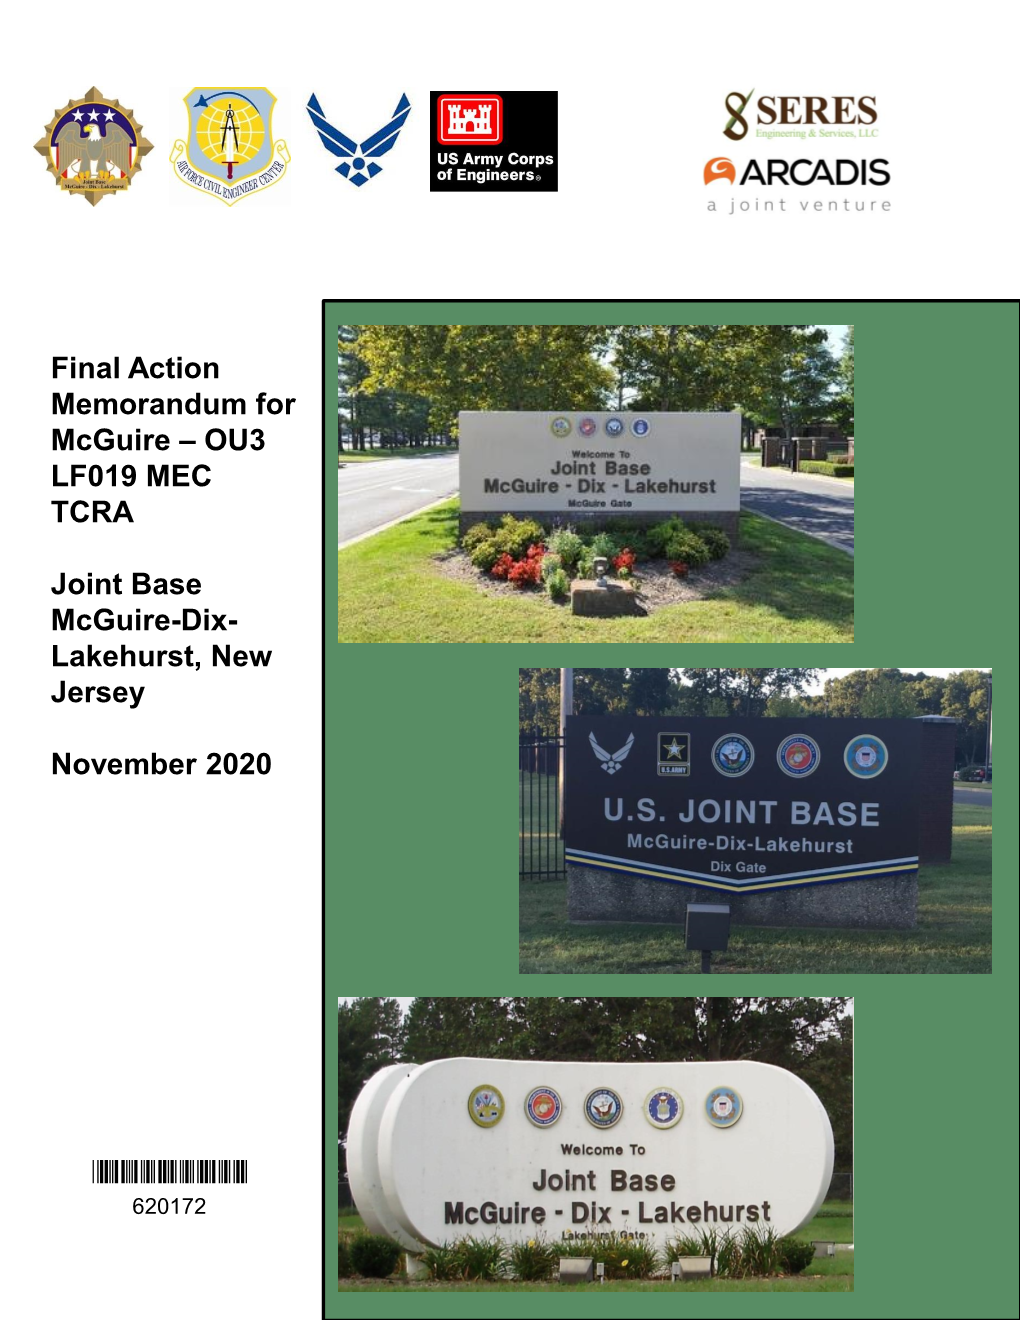 Final Action Memorandum for November 2020 for Ou3 for the Mcguire Air Force Base #1 Site